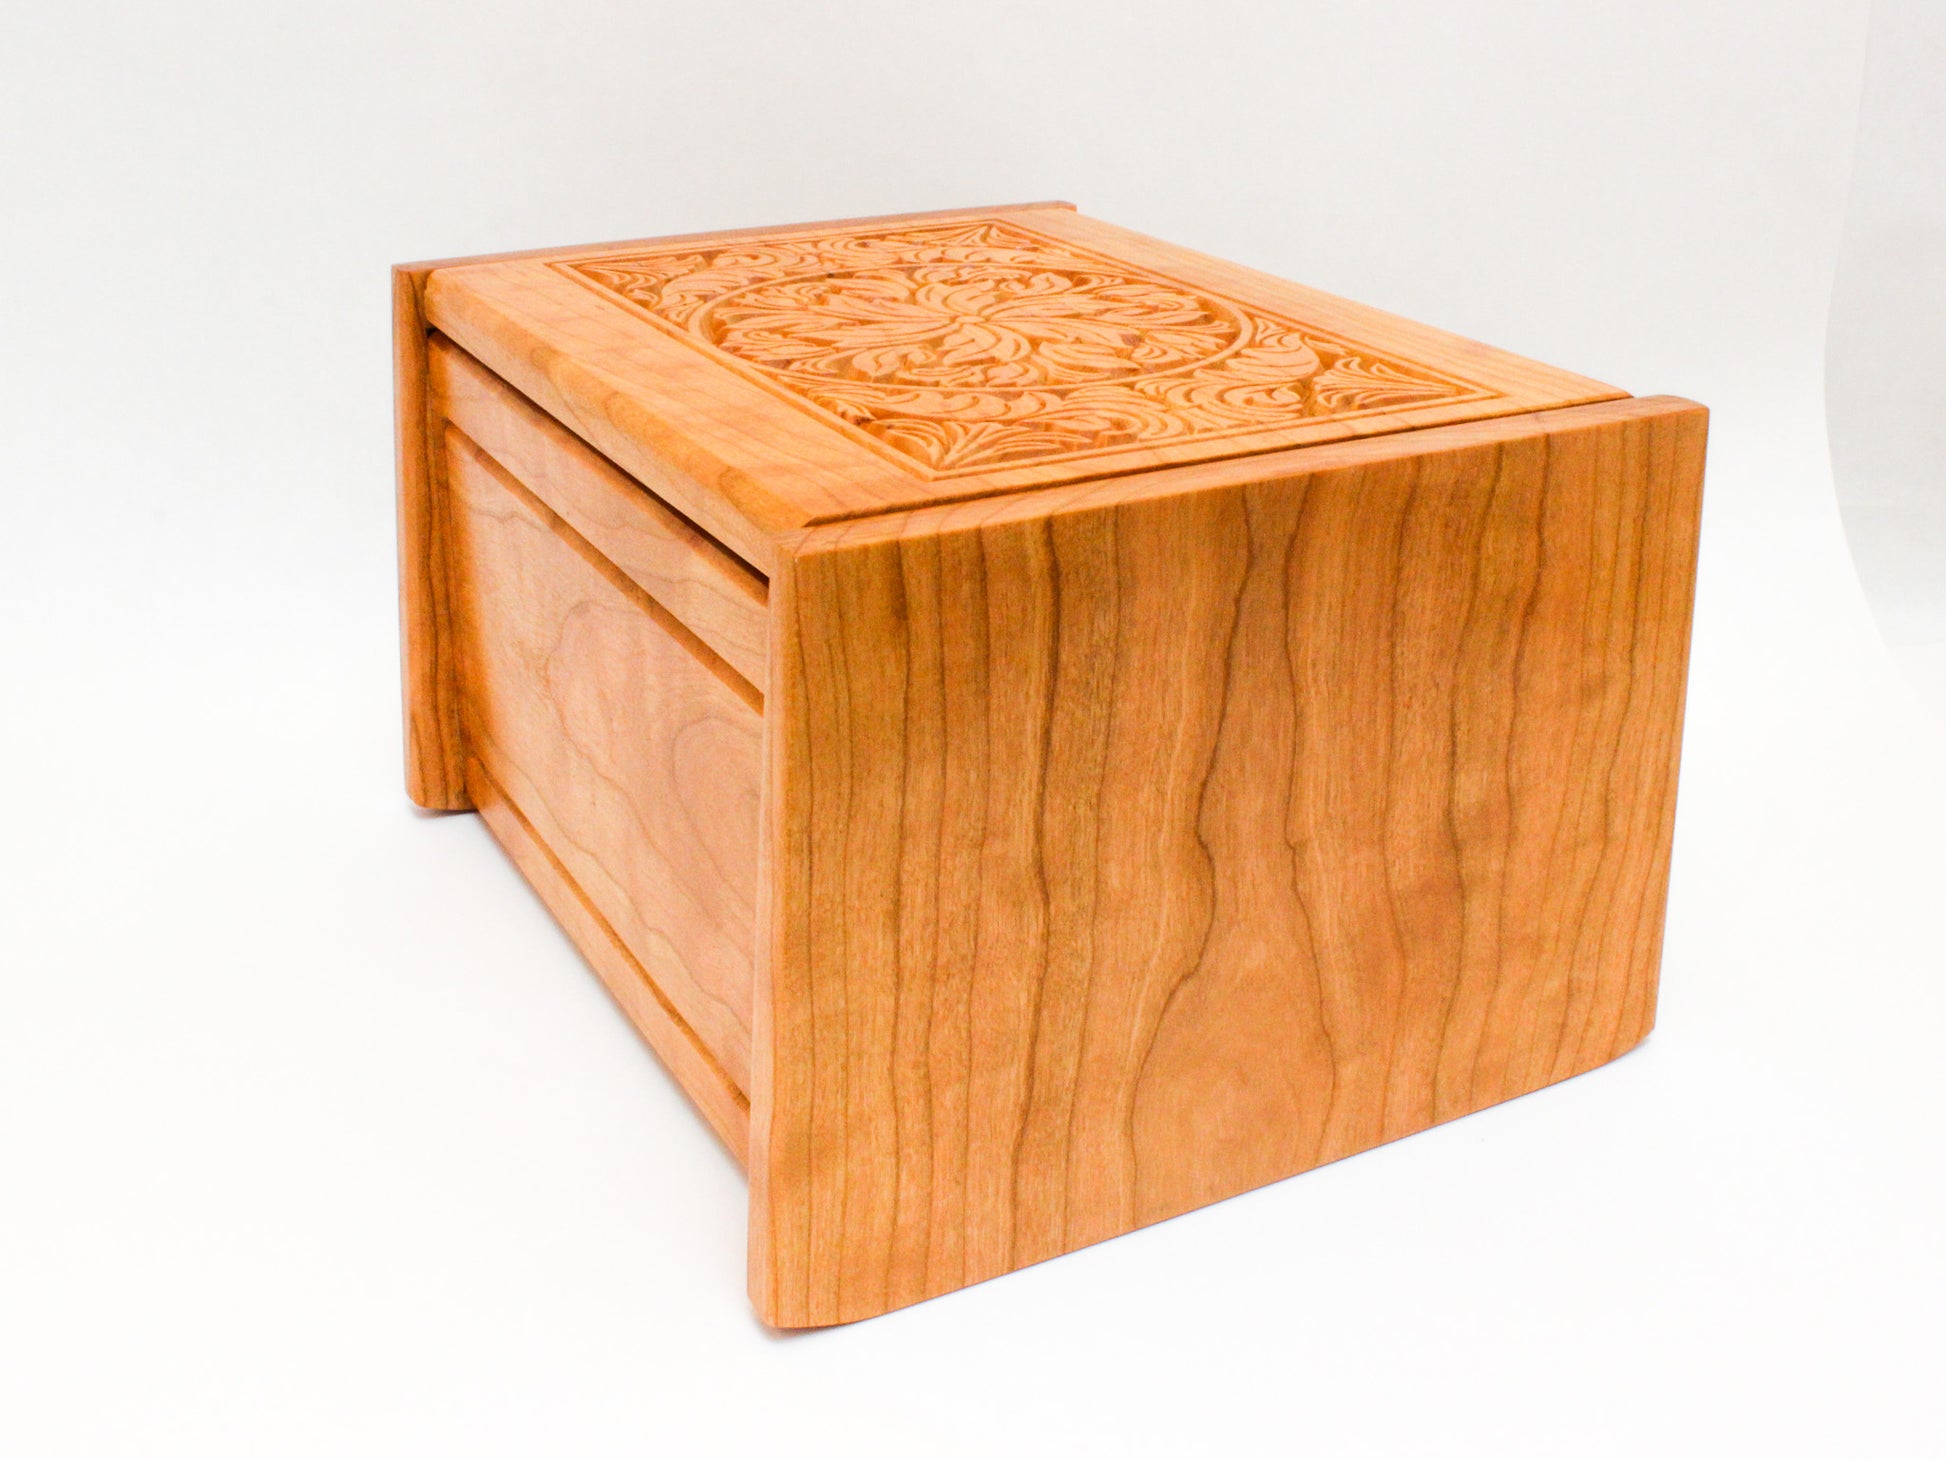 Side view of wooden keepsake box with engraved top and hinged lid. Personalized engravings available!